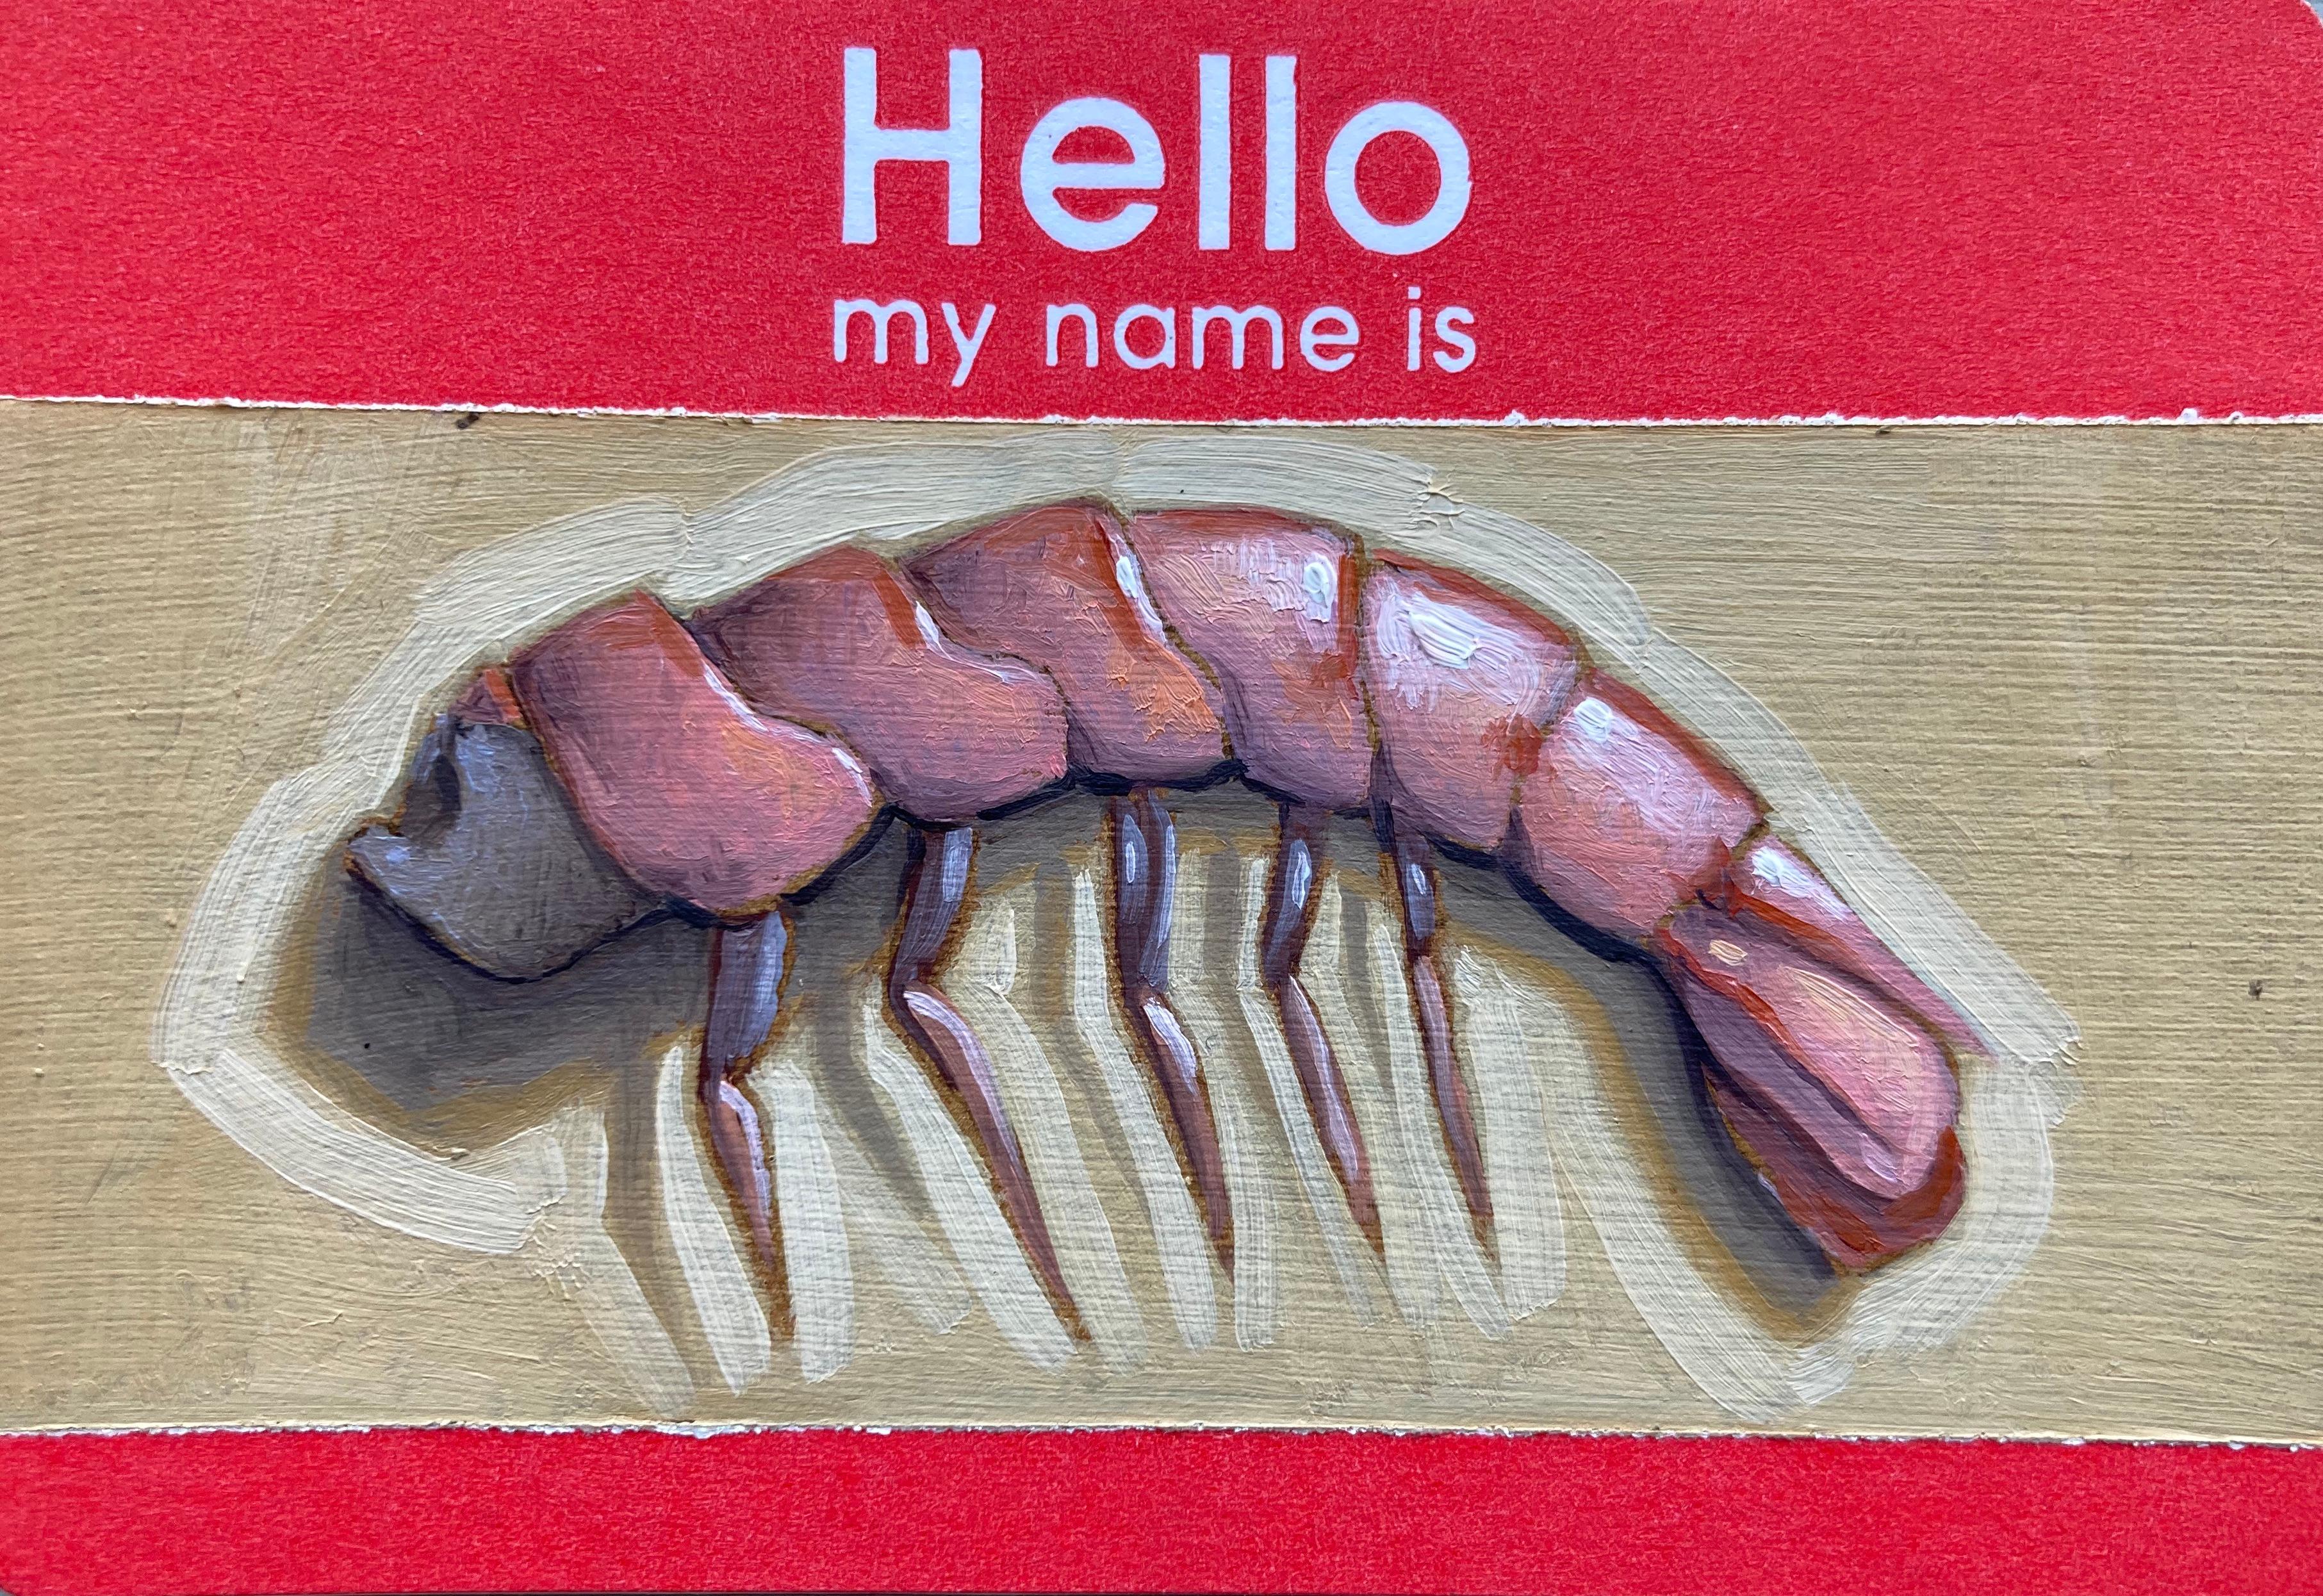 Hello, My Name Is: Shrimp - miniature pictograph painting on paper - Mixed Media Art by Anthony Mastromatteo